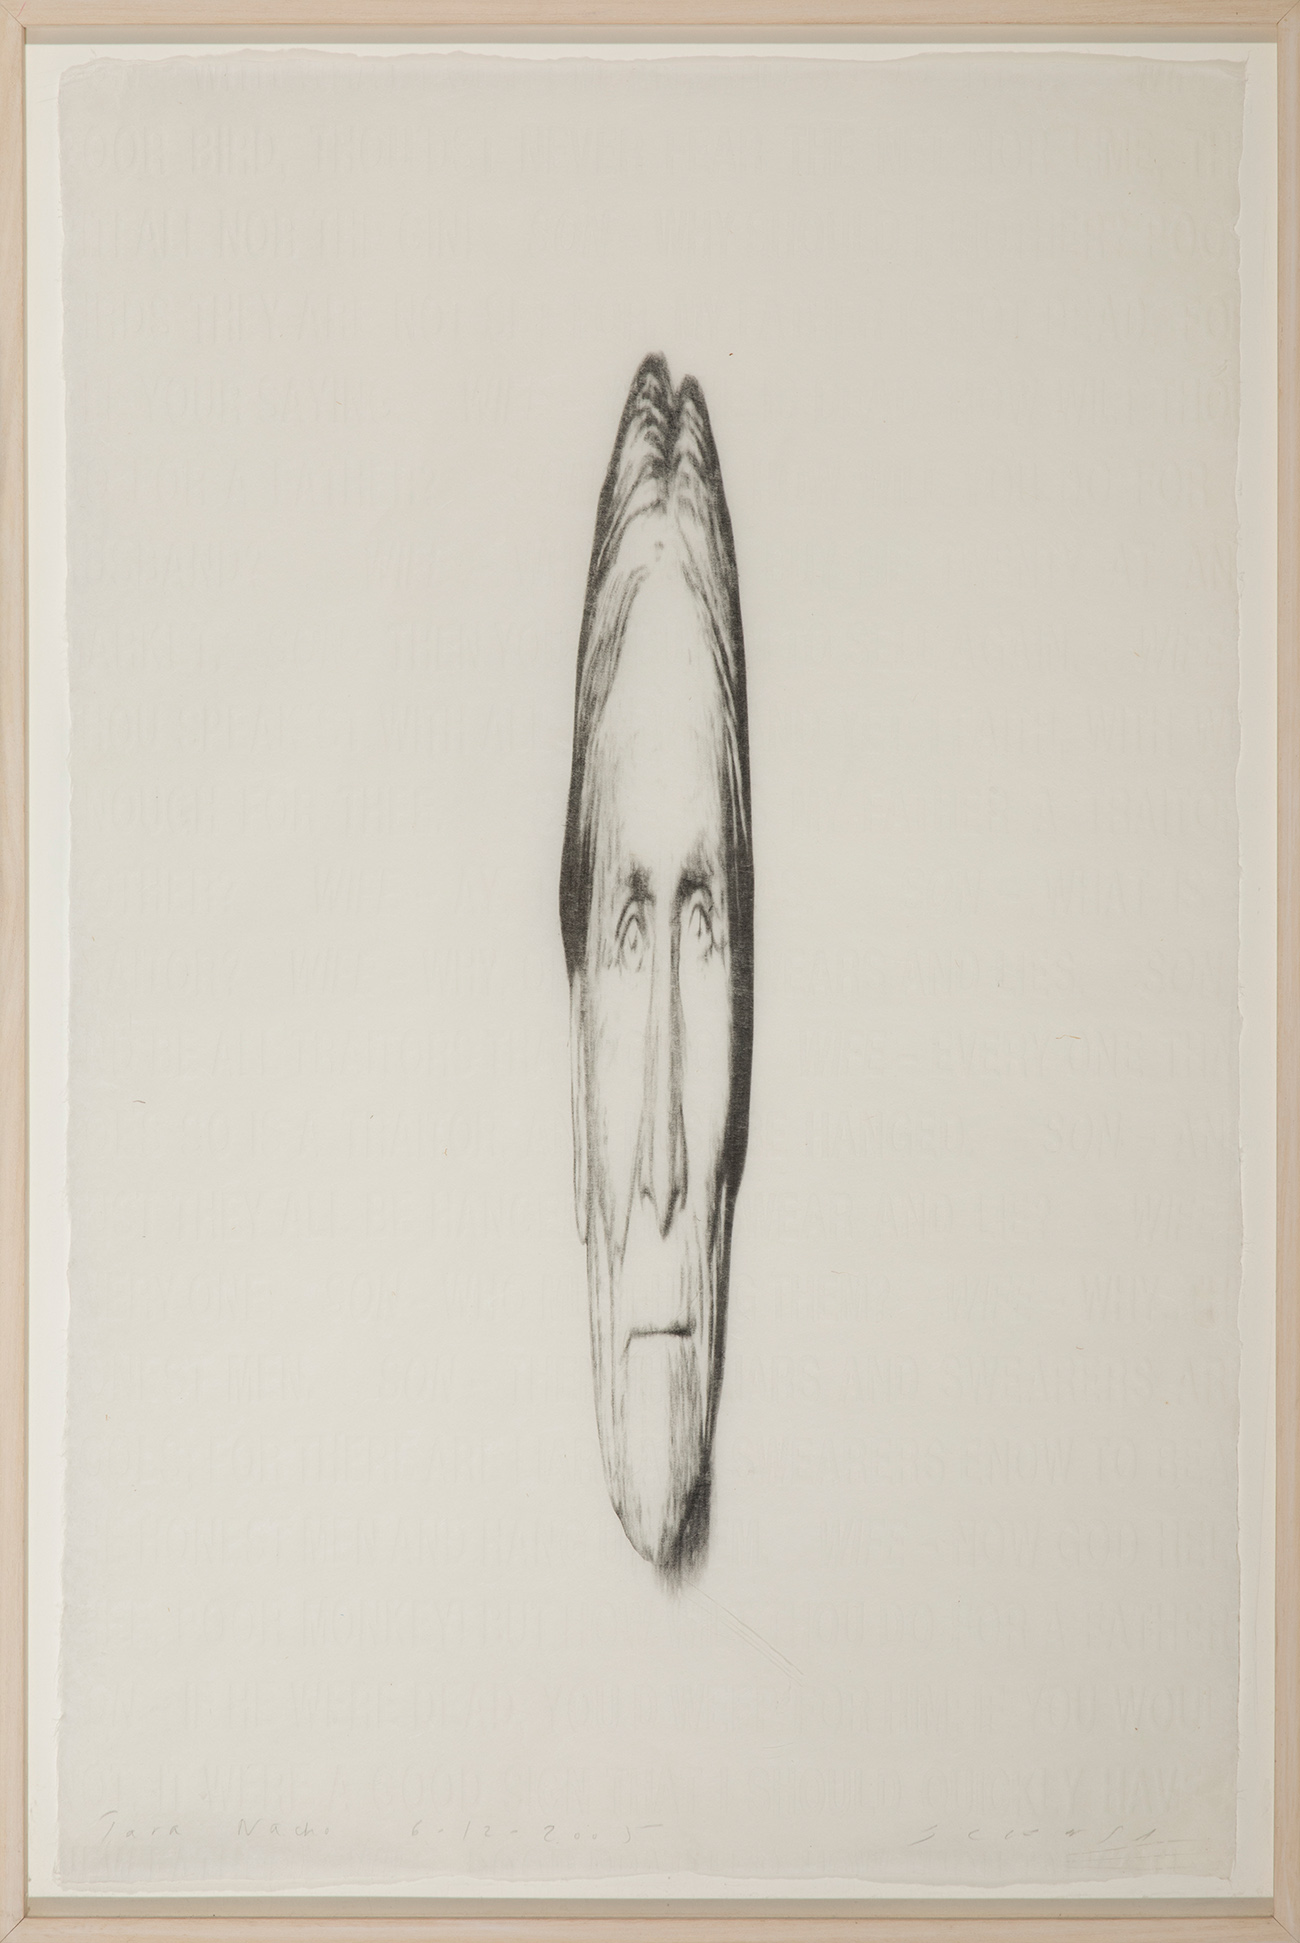 JAUME PLENSA (Barcelona, 1955)."Anonim I", 2005-Lithography and etching on Kôzo paper (20gr). Copy - Image 5 of 5